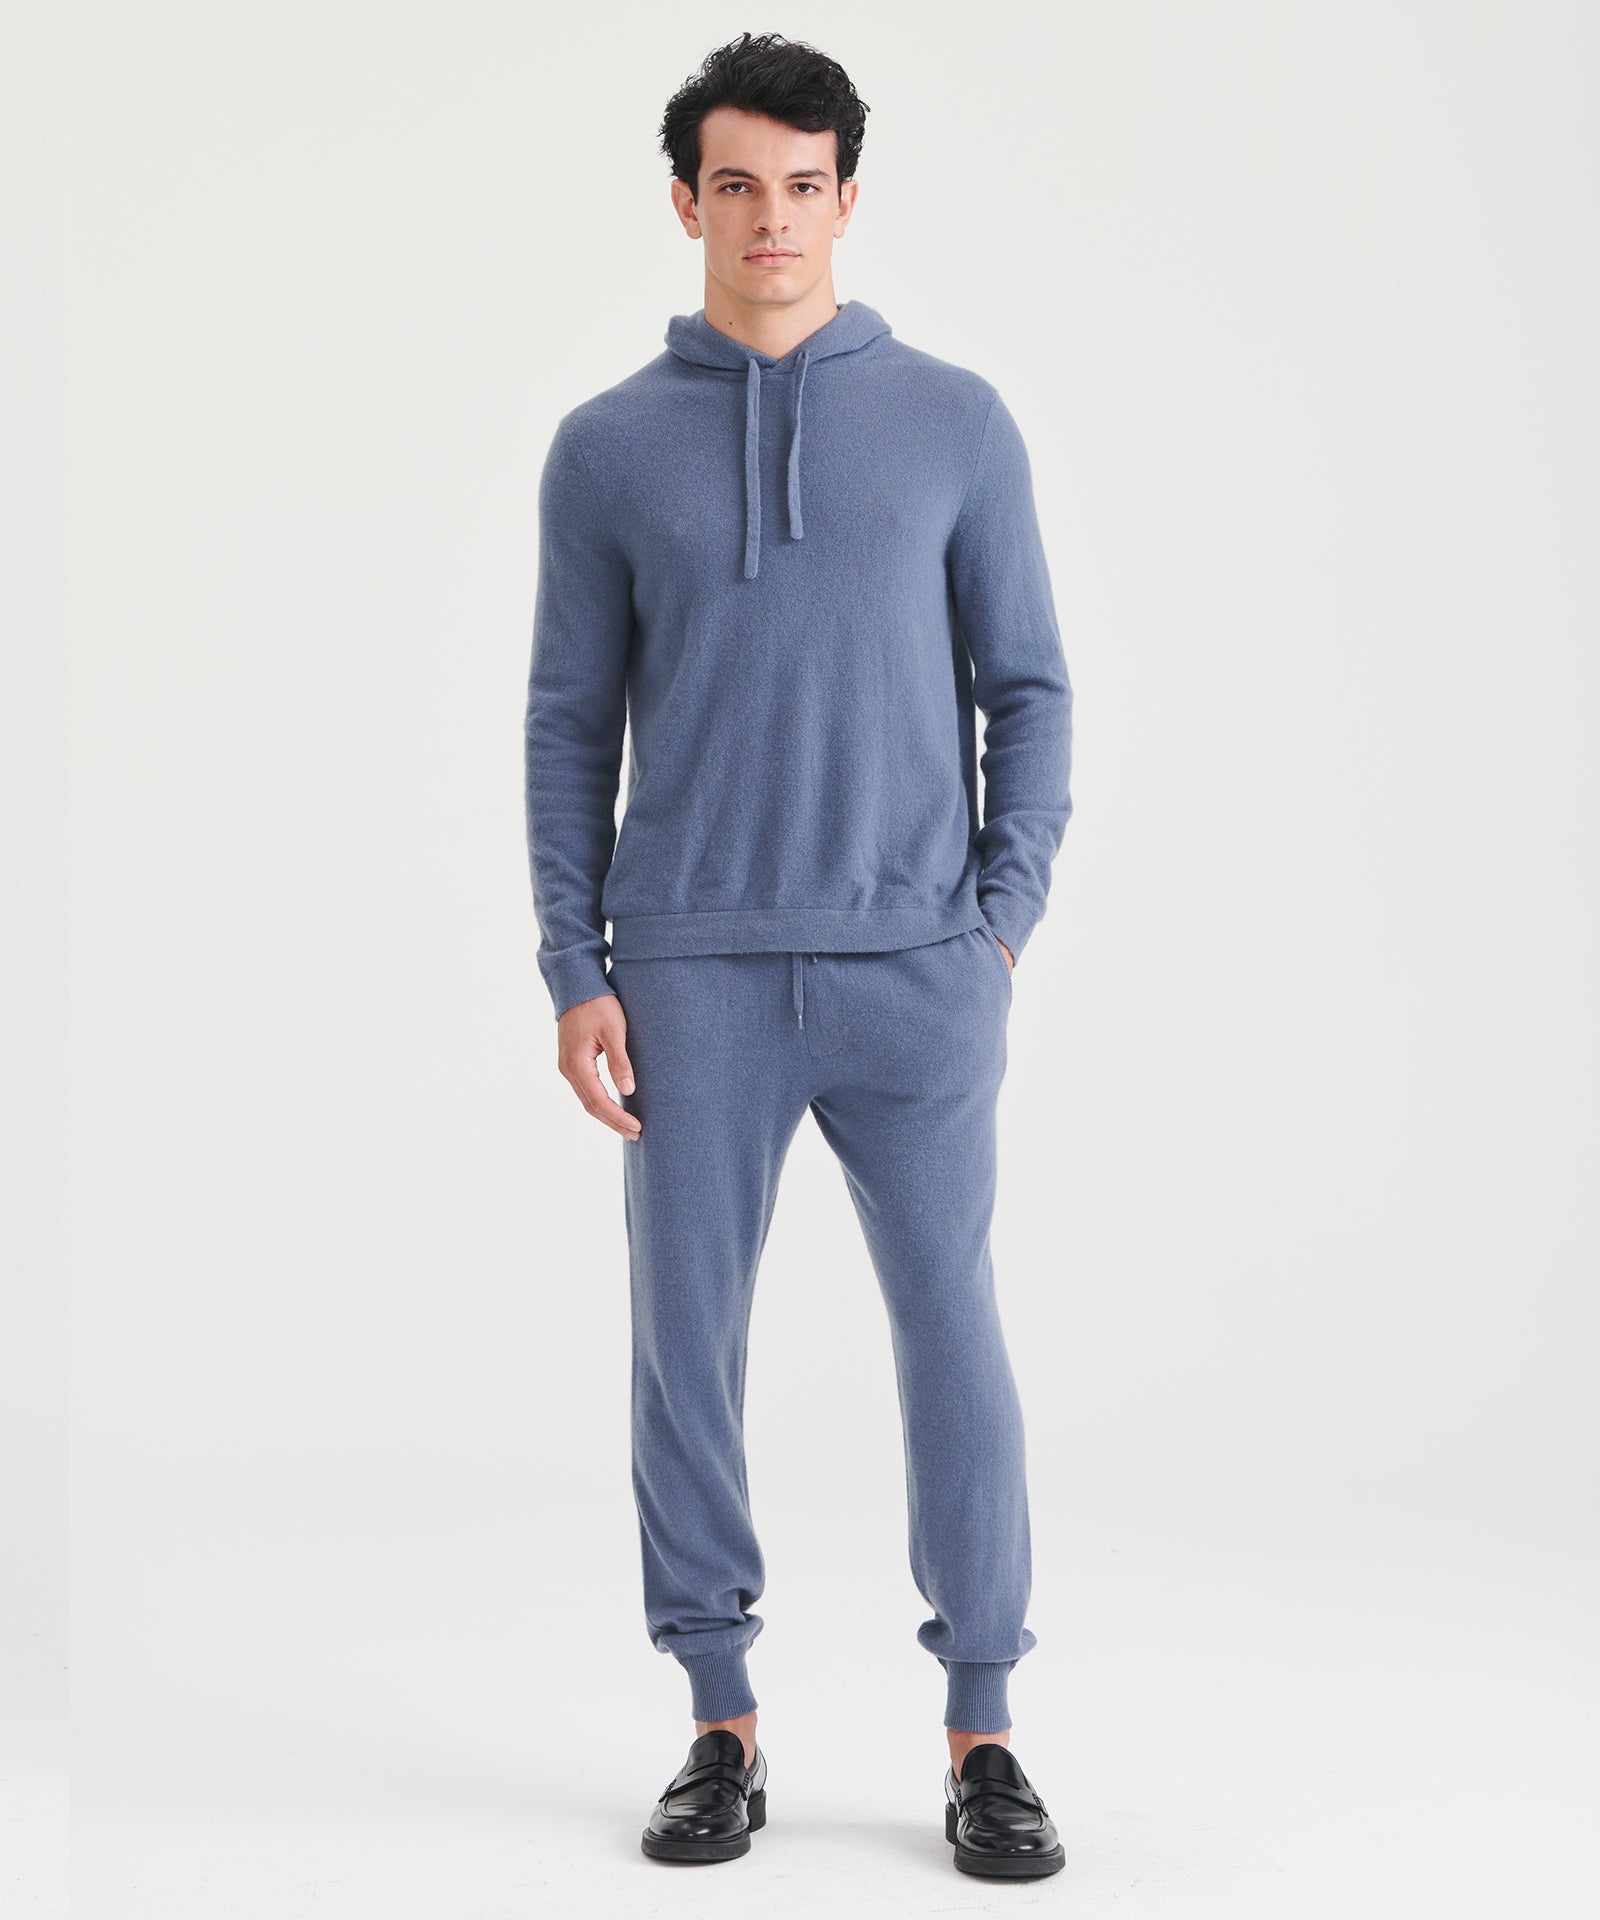 Off-Duty Cashmere Jogger